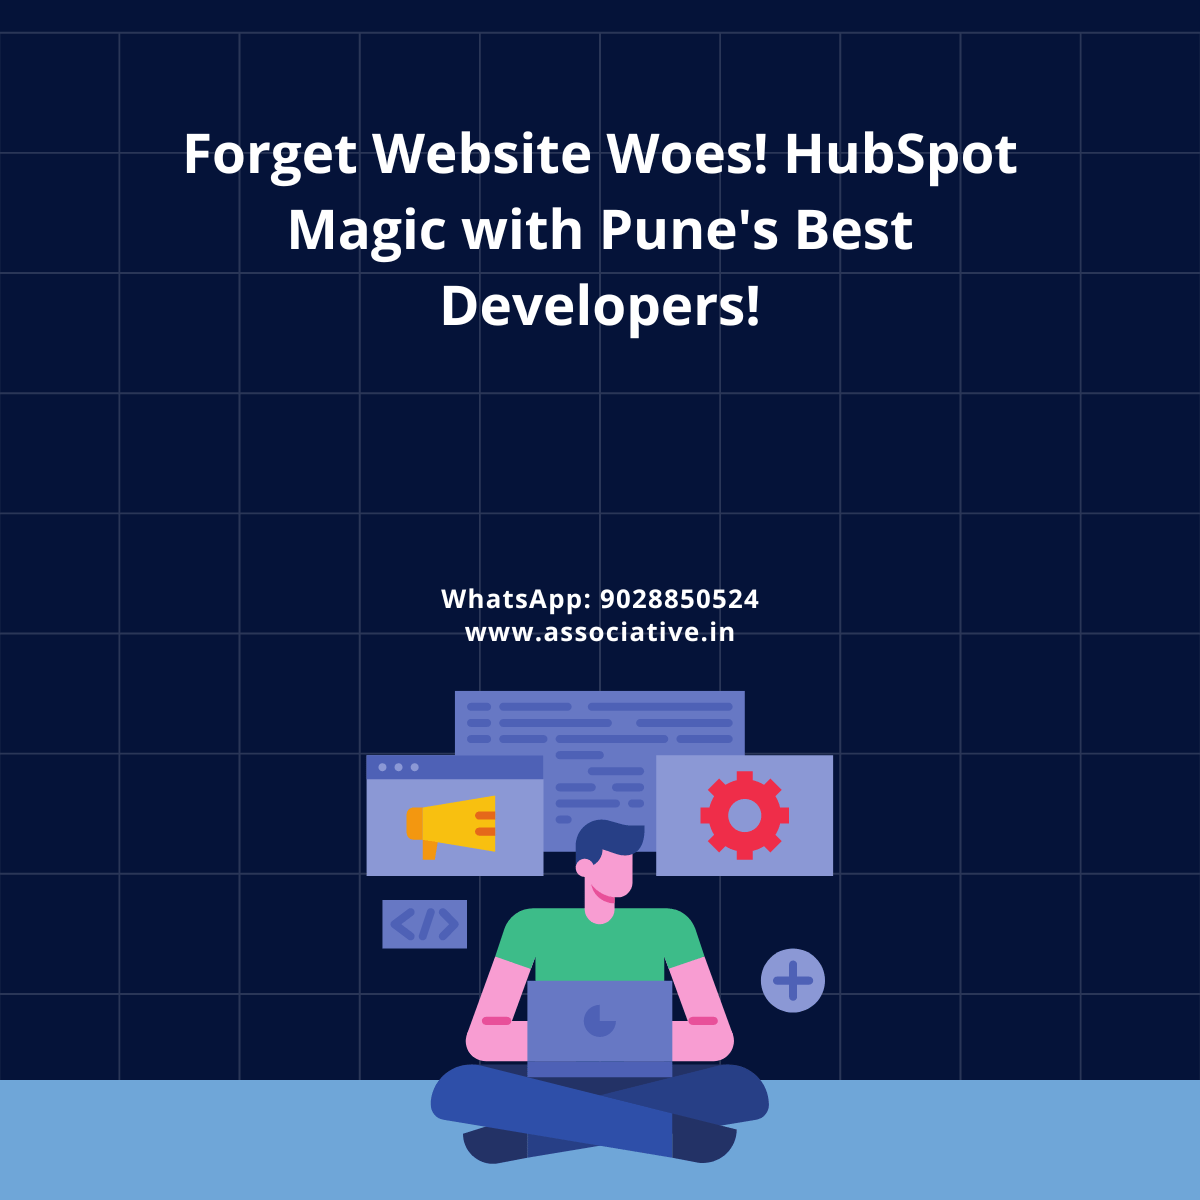 Forget Website Woes! HubSpot Magic with Pune's Best Developers!